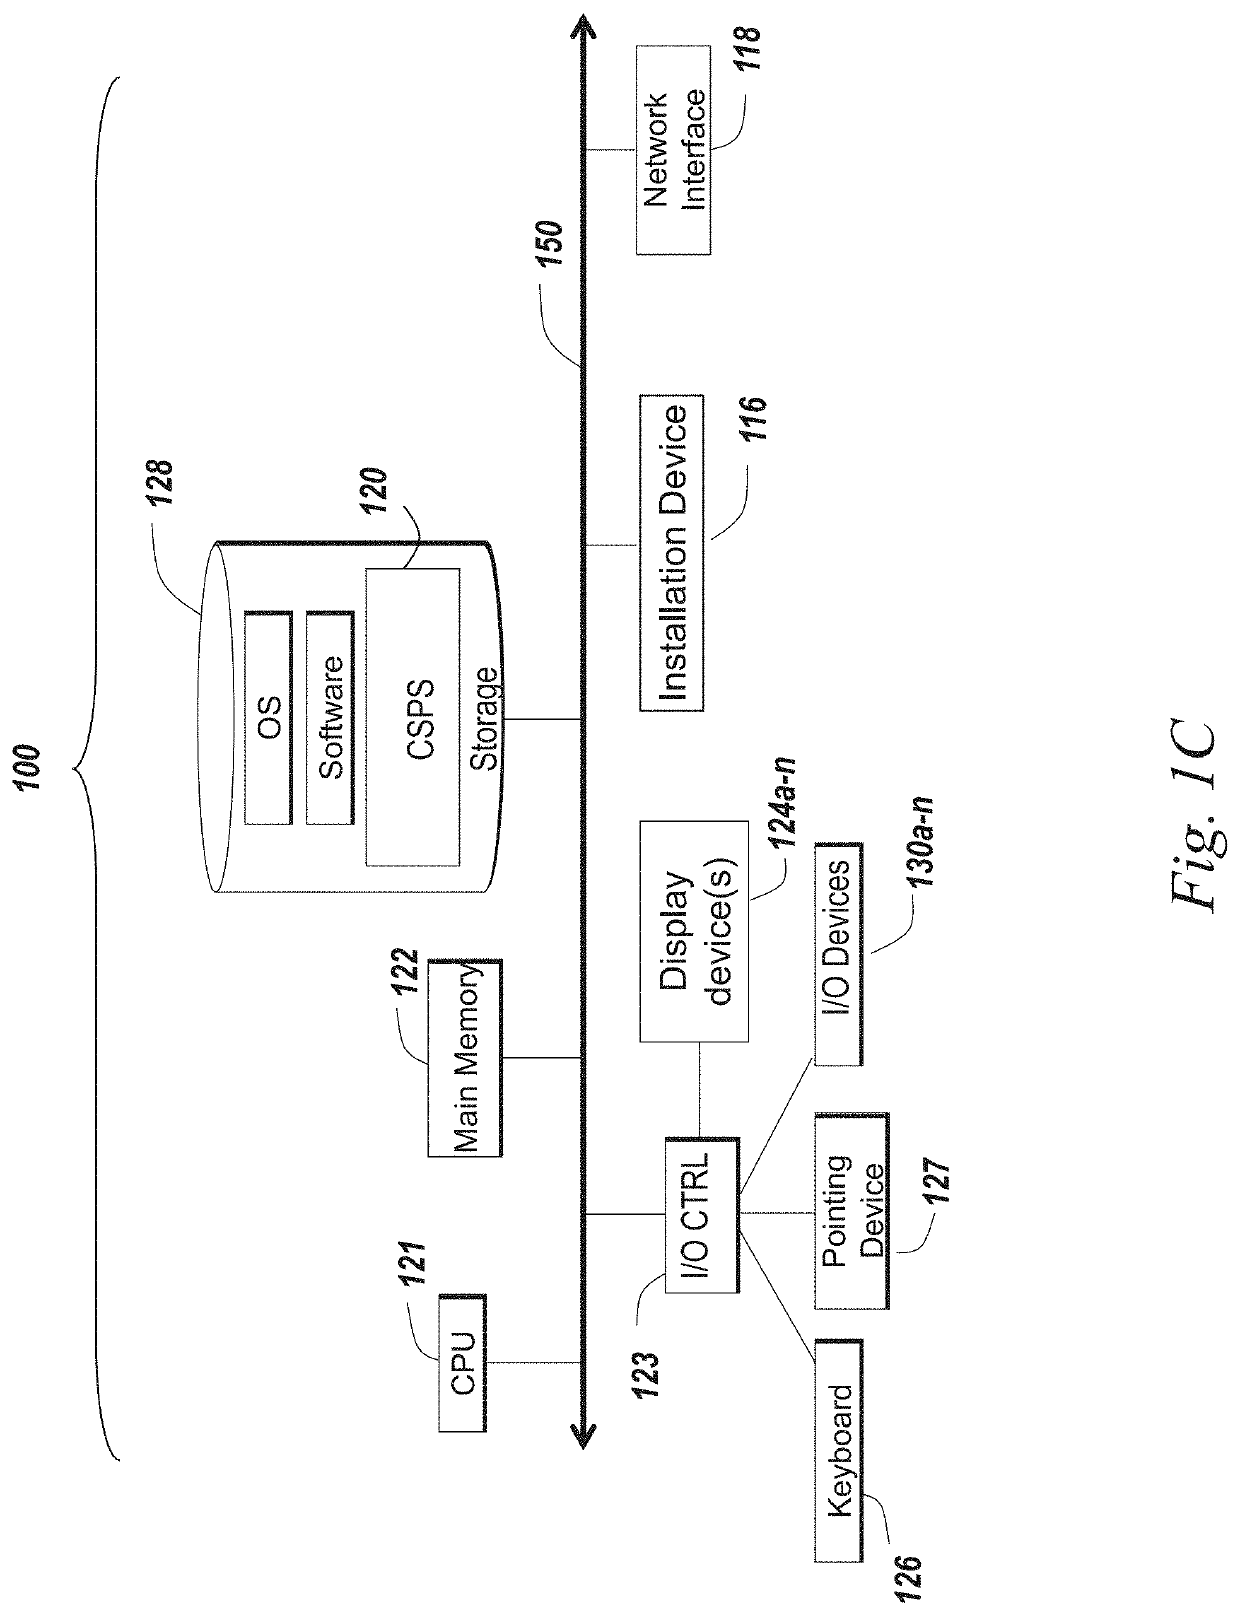 Fraud detection and control in multi-tiered centralized processing